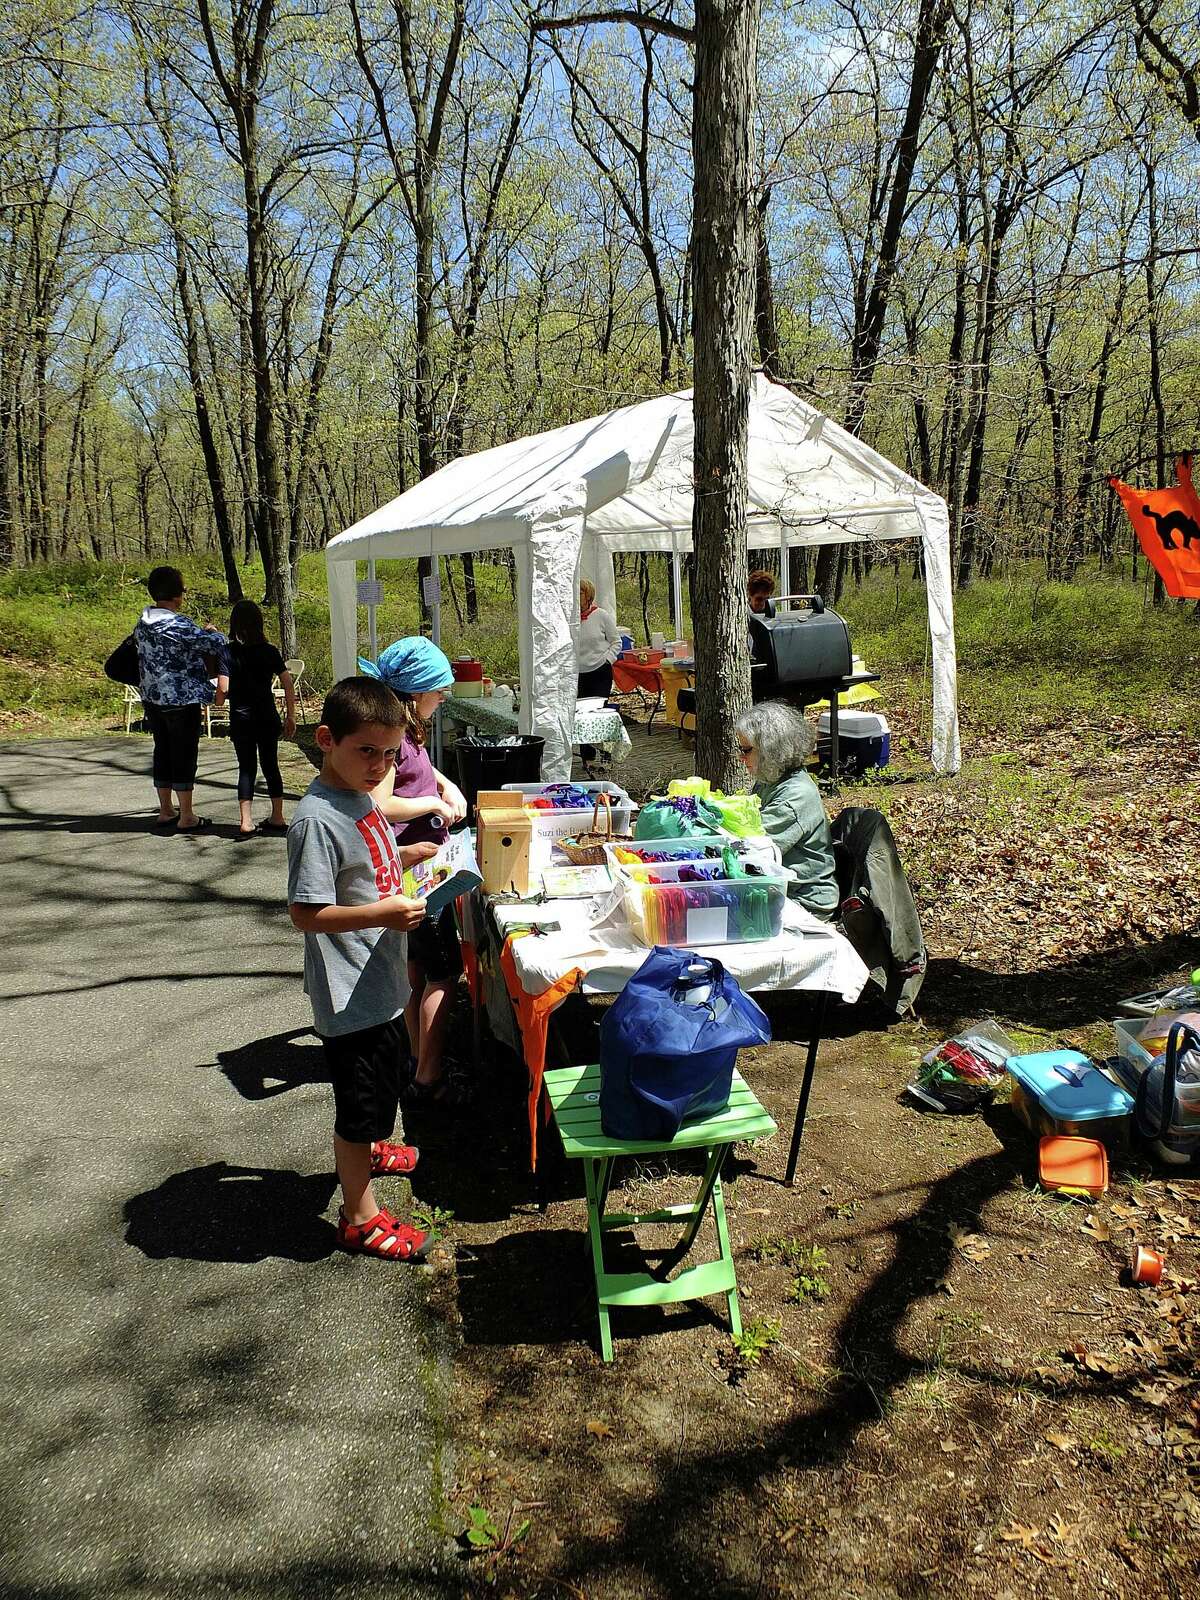 Visitors to the Lady’s Slipper Festival at the Huron County Nature Center peruse the offerings of arts and crafts vendors set up along the trail system during the festival.